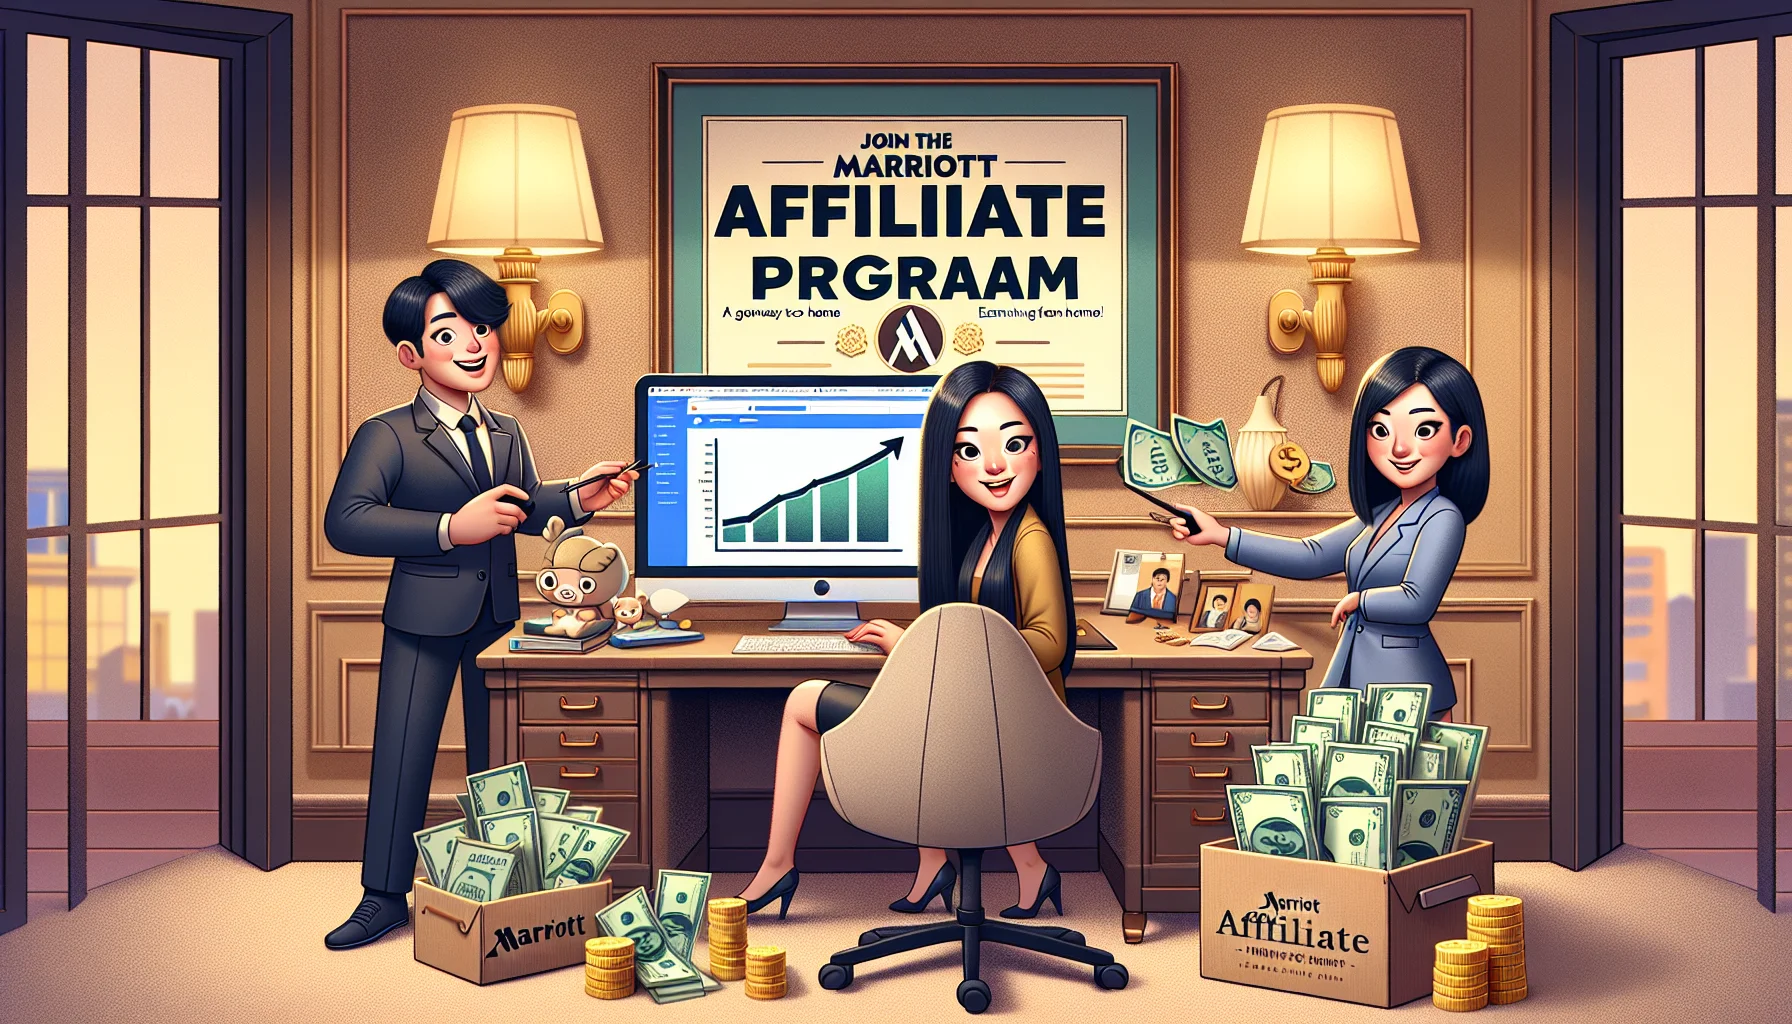 Create an engaging and humorous image set in a room that showcases the concept of Marriott's affiliate program. The room should be designed as a sophisticated home office with a large desktop displaying a graph which signifies growth. Beside the desktop, a pile of dollar bills and coins are arranged to symbolize the potential earnings from the program. Make sure to include people in the set-up. Specifically, an East Asian female sitting behind the desk, her hand on the mouse, with an excited and hopeful look on her face. Also, depict a South Asian male standing beside her, pointing at the screen with a smile on his face as if showing her the benefits of the program. The background should have a tastefully framed poster saying, 'Join the Marriott Affiliate Program! A gateway to earning from home.' The overall scene should make the viewers feel the allure of the idea of making money online.